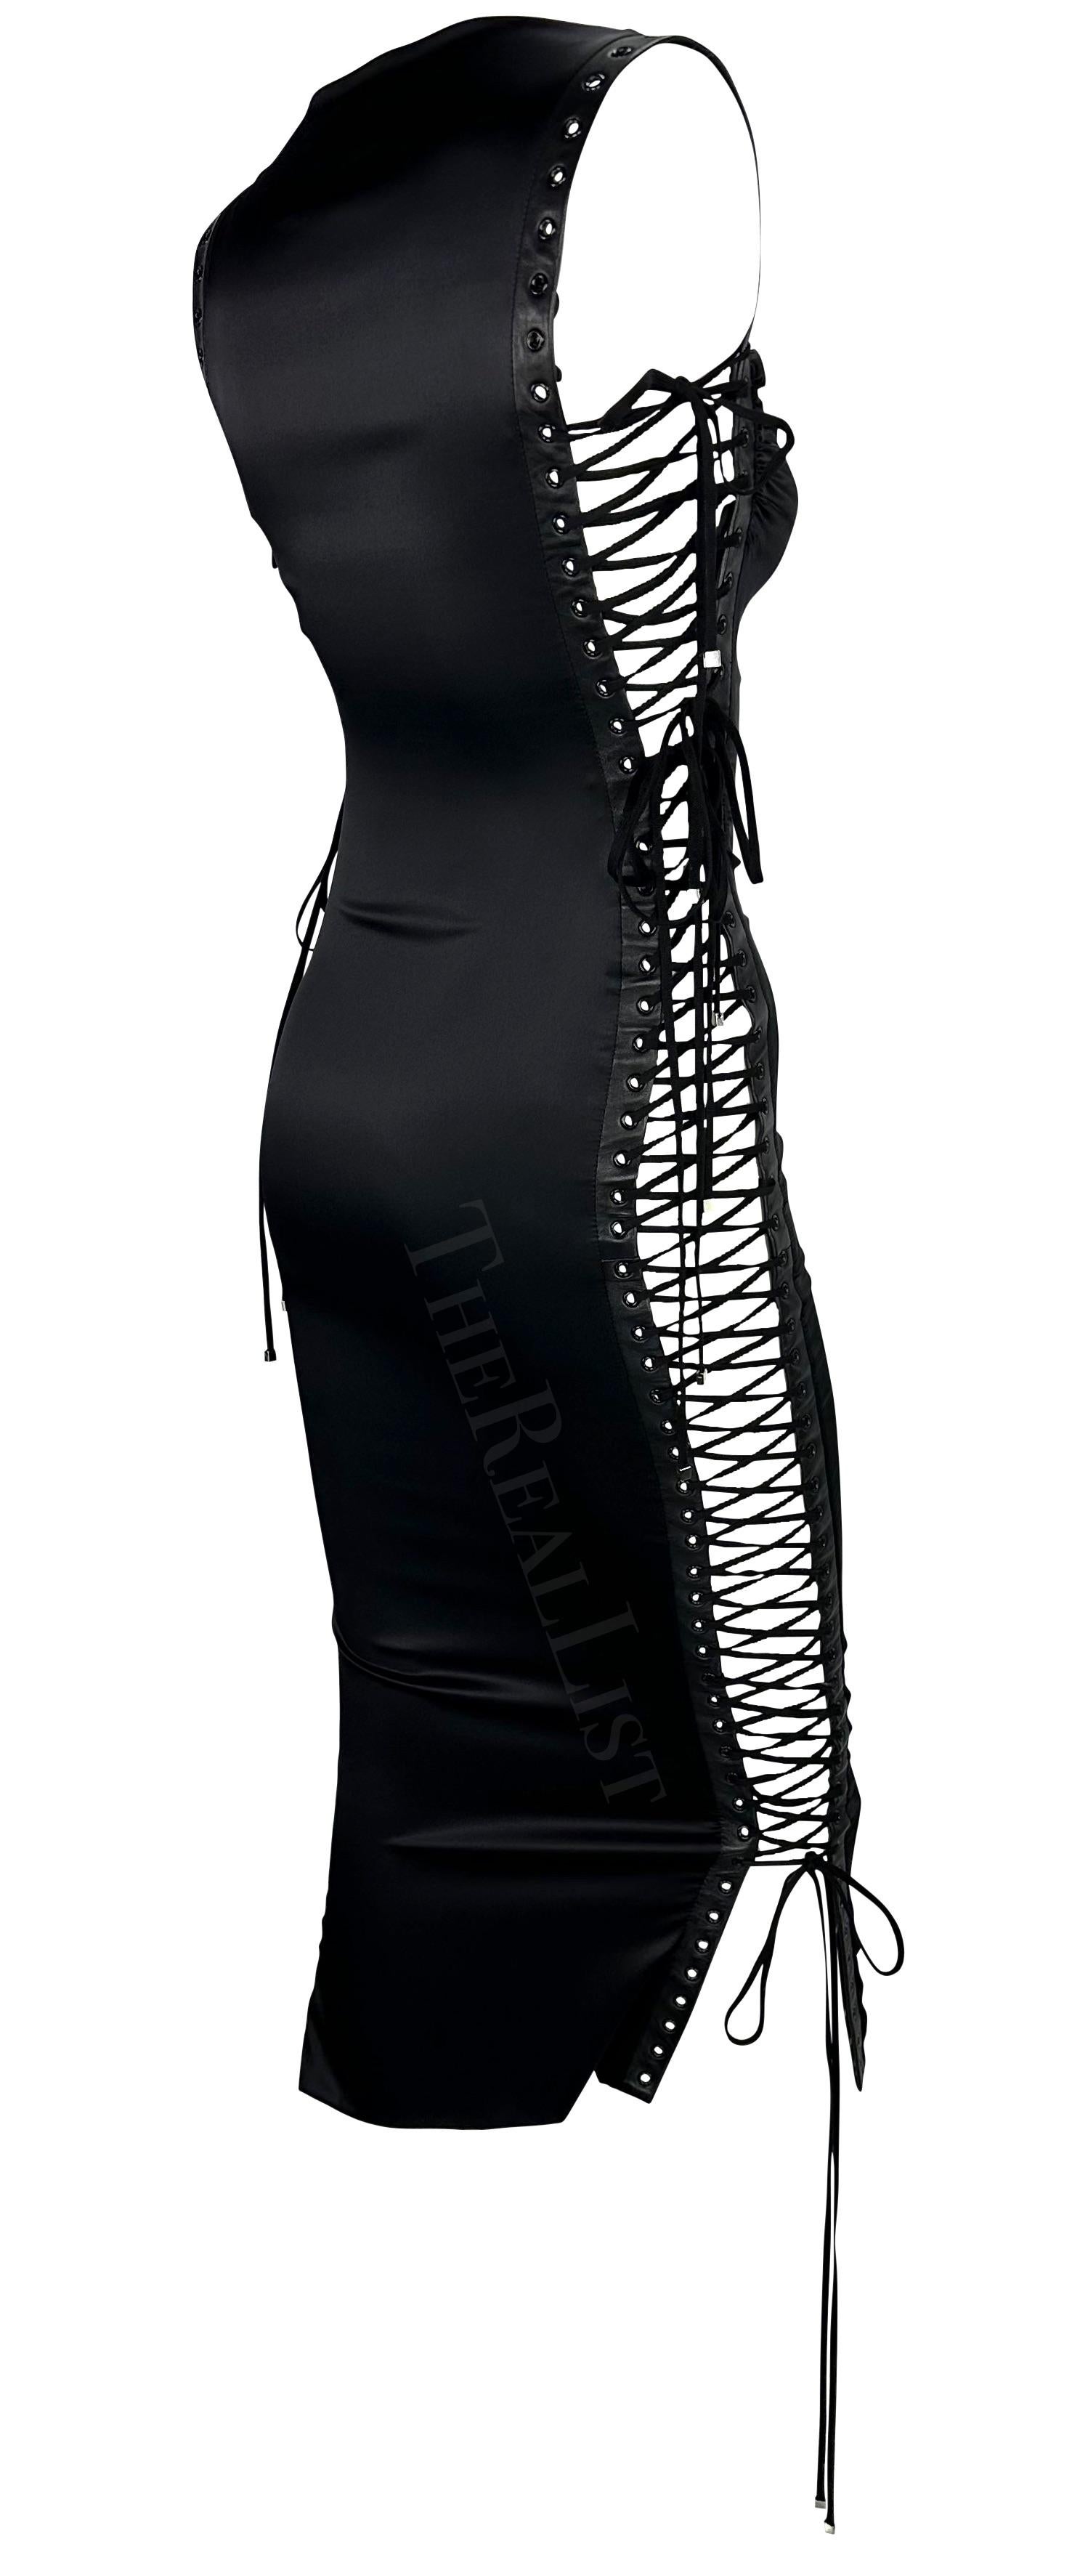 S/S 2003 Dolce & Gabbana Runway Ad Lace-Up Satin Bodycon Dress For Sale 6